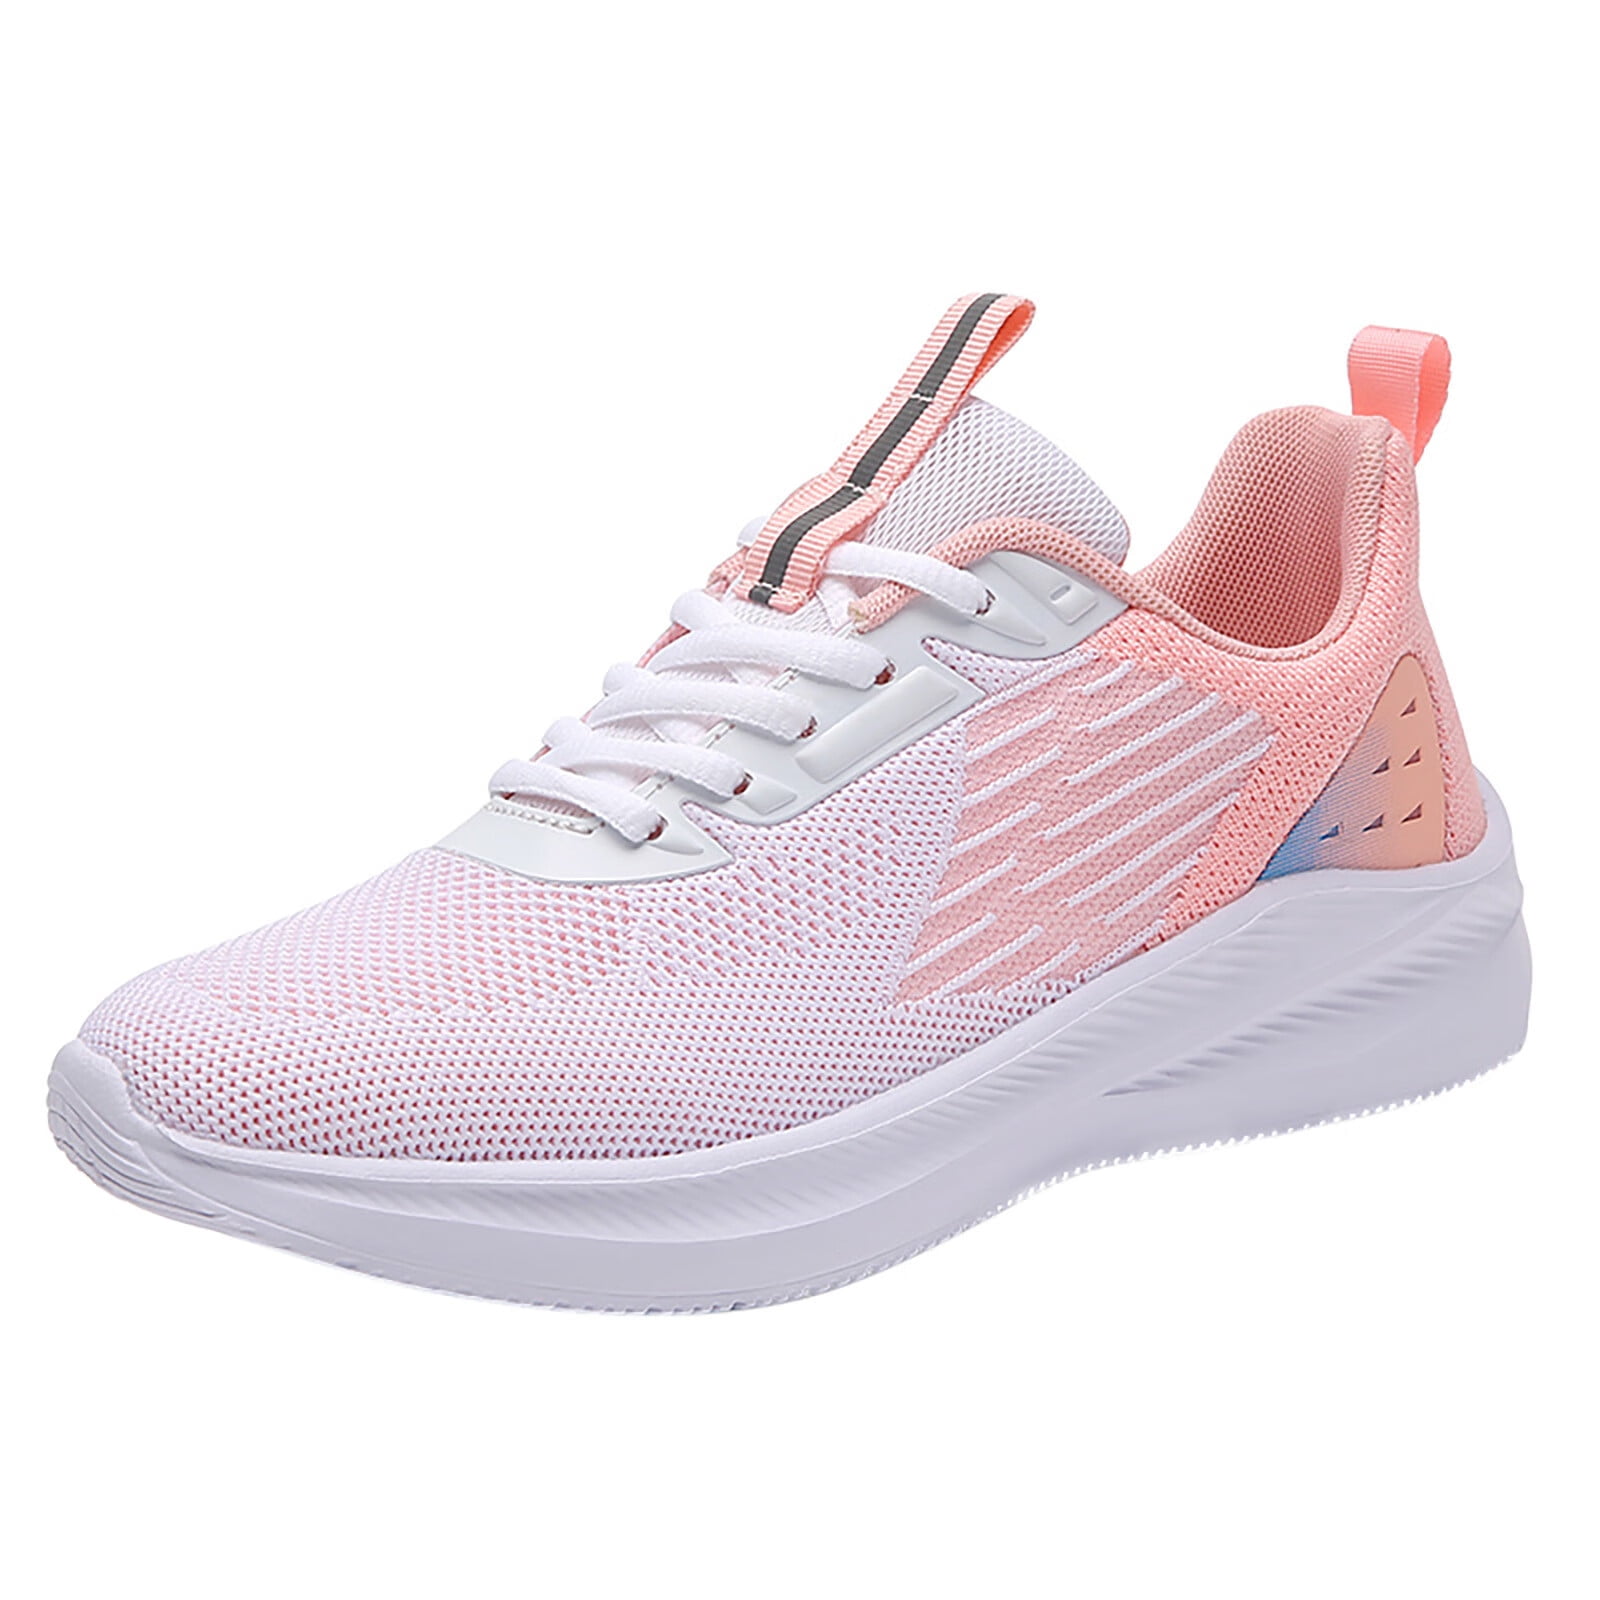 Sneakers for Women Leisure Women'S Lace Up Travel Soft Sole Comfortable  Shoes Outdoor Mesh Shoes Runing Fashion Sports Breathable Shoes Womens